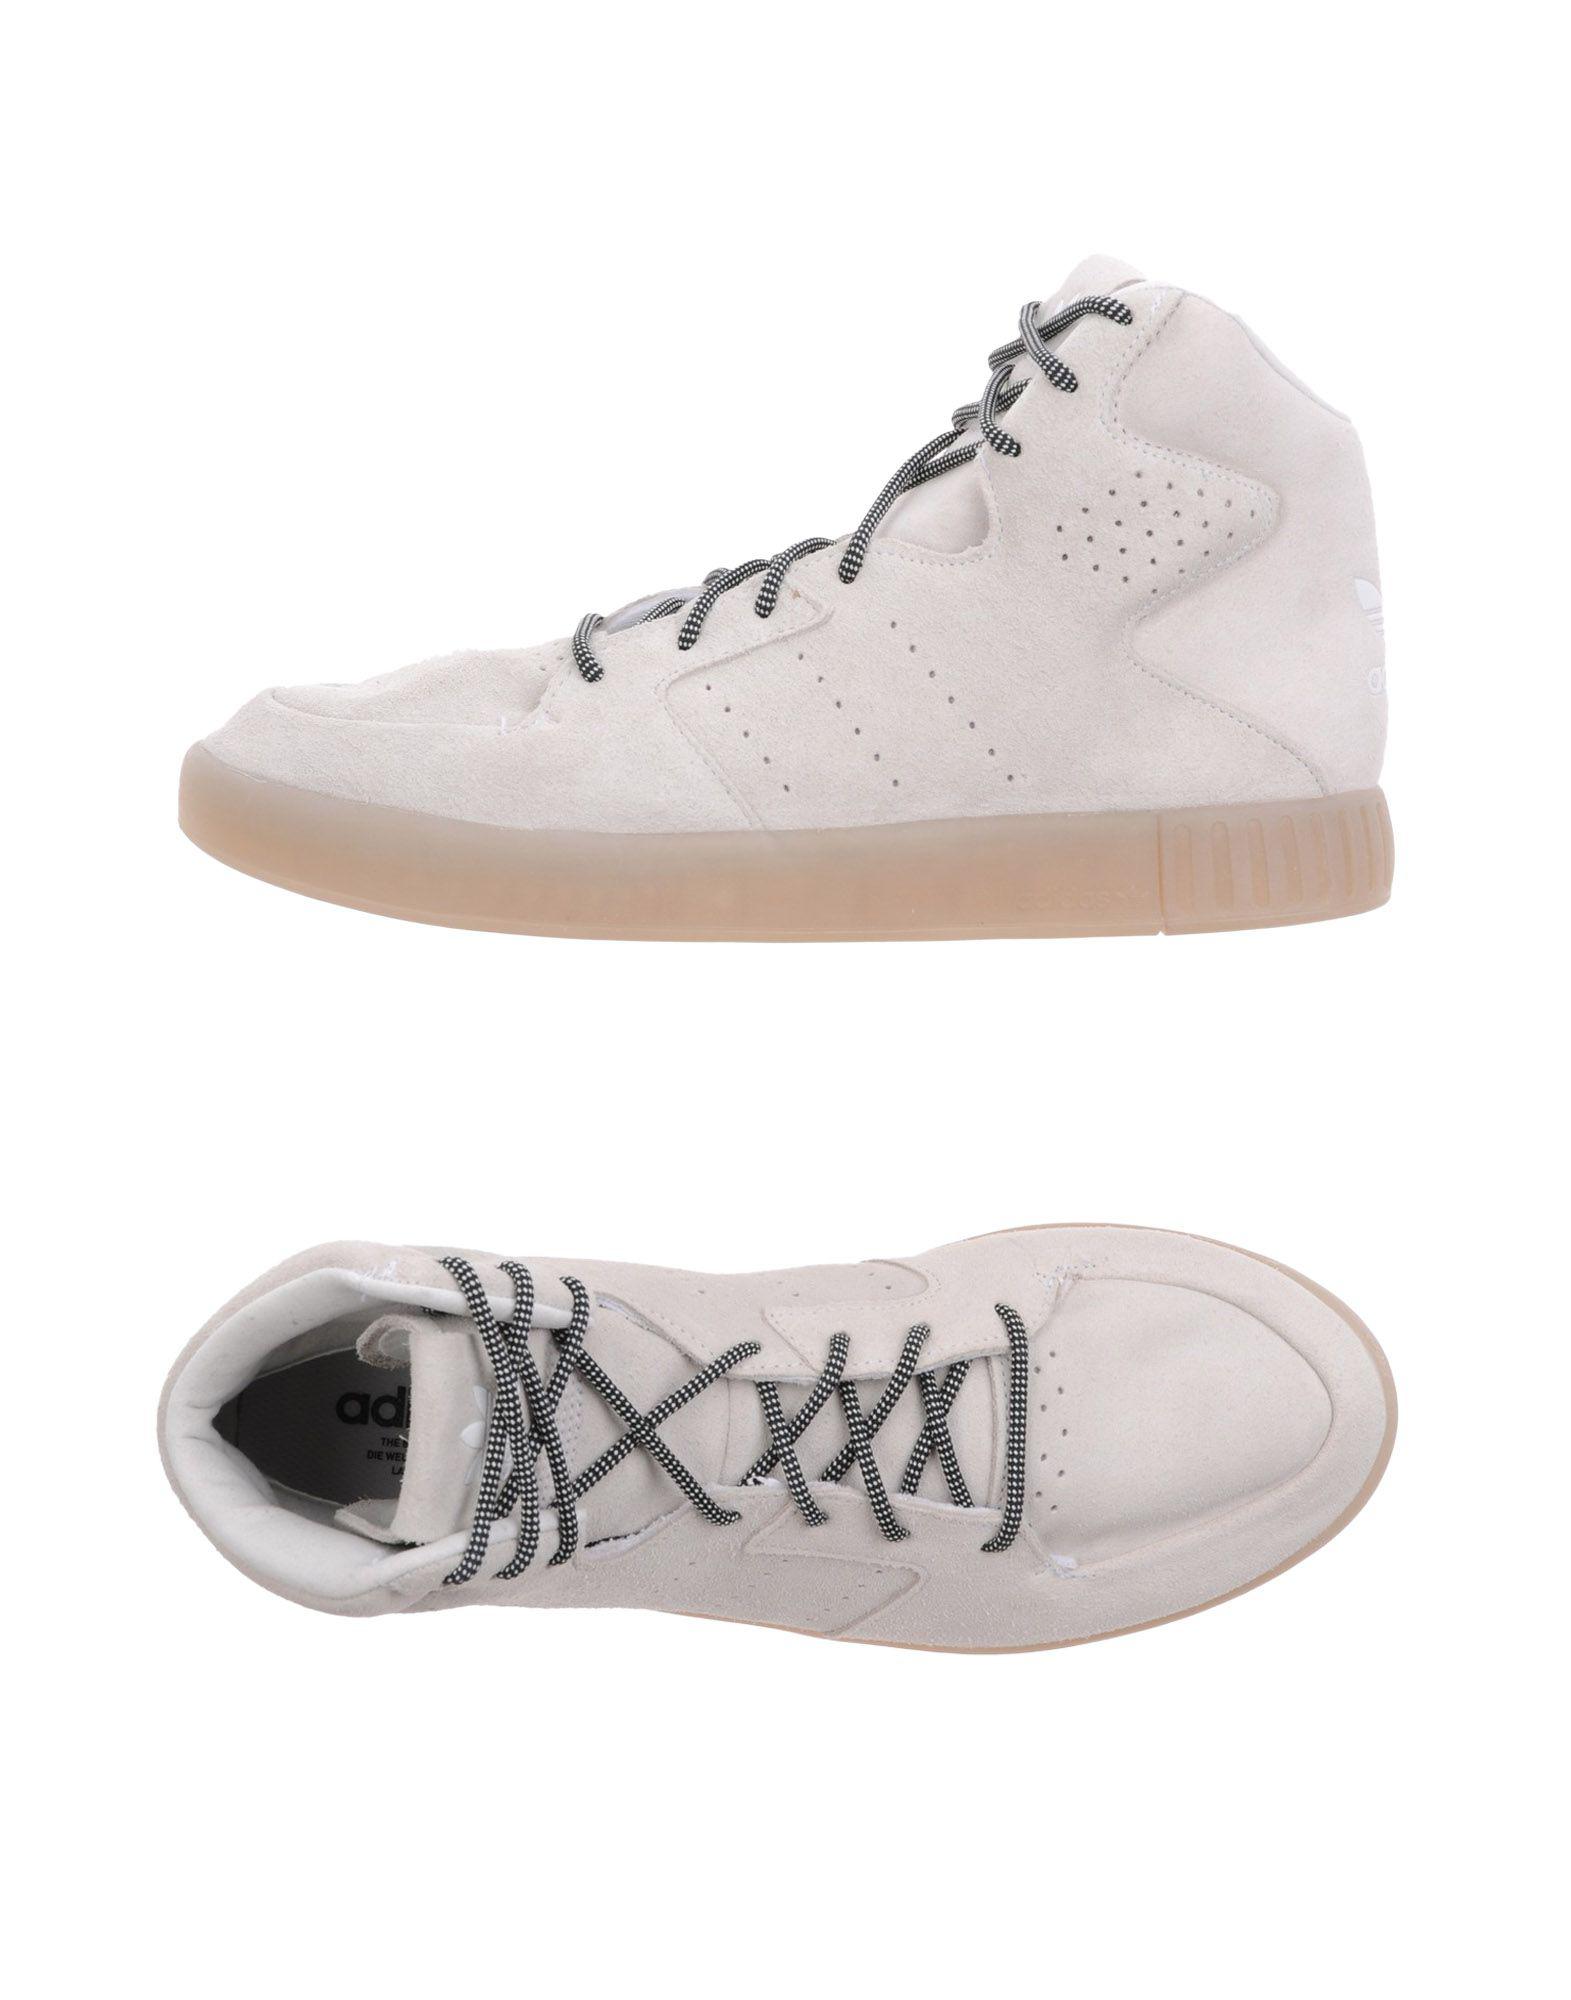 adidas Leather High-tops & Sneakers in Light Grey (Gray) for Men - Lyst